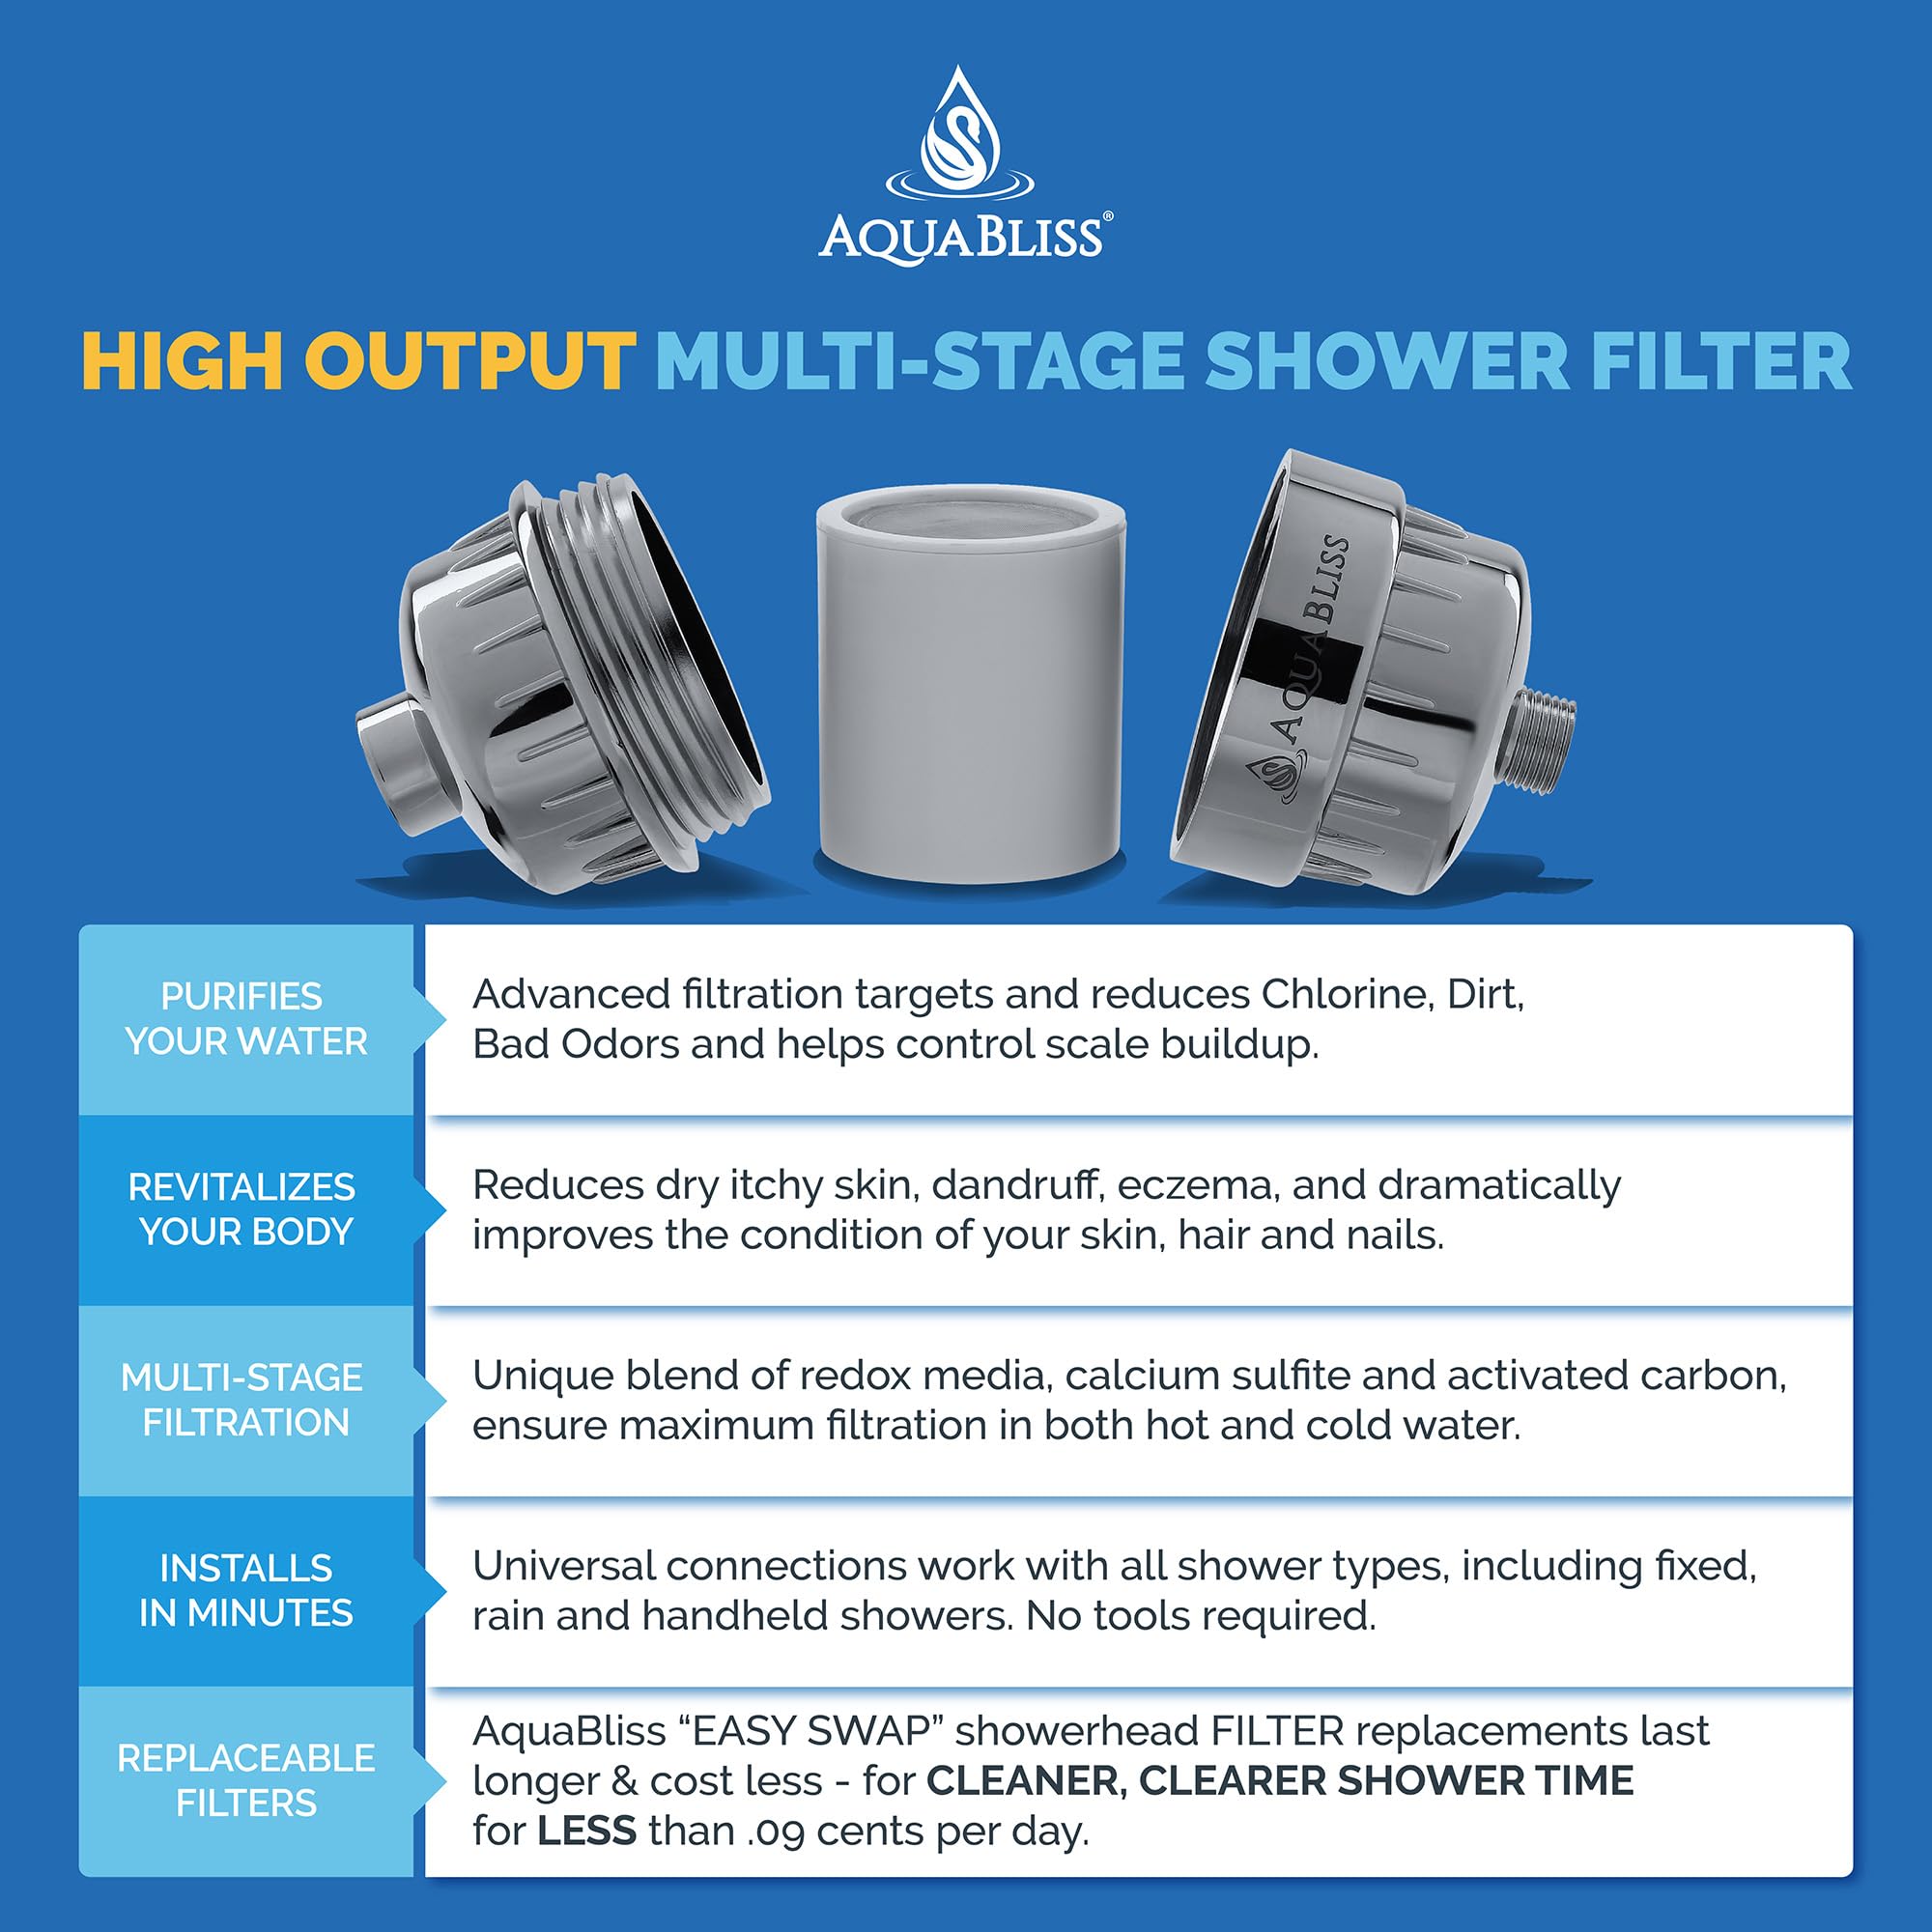 AquaBliss Replacement Multi-Stage Shower Filter Cartridge - Longest Lasting High Output Universal Shower Filter Reduces Chlorine & Toxins in SF220 or SF100. 3-Pack (SFC220)